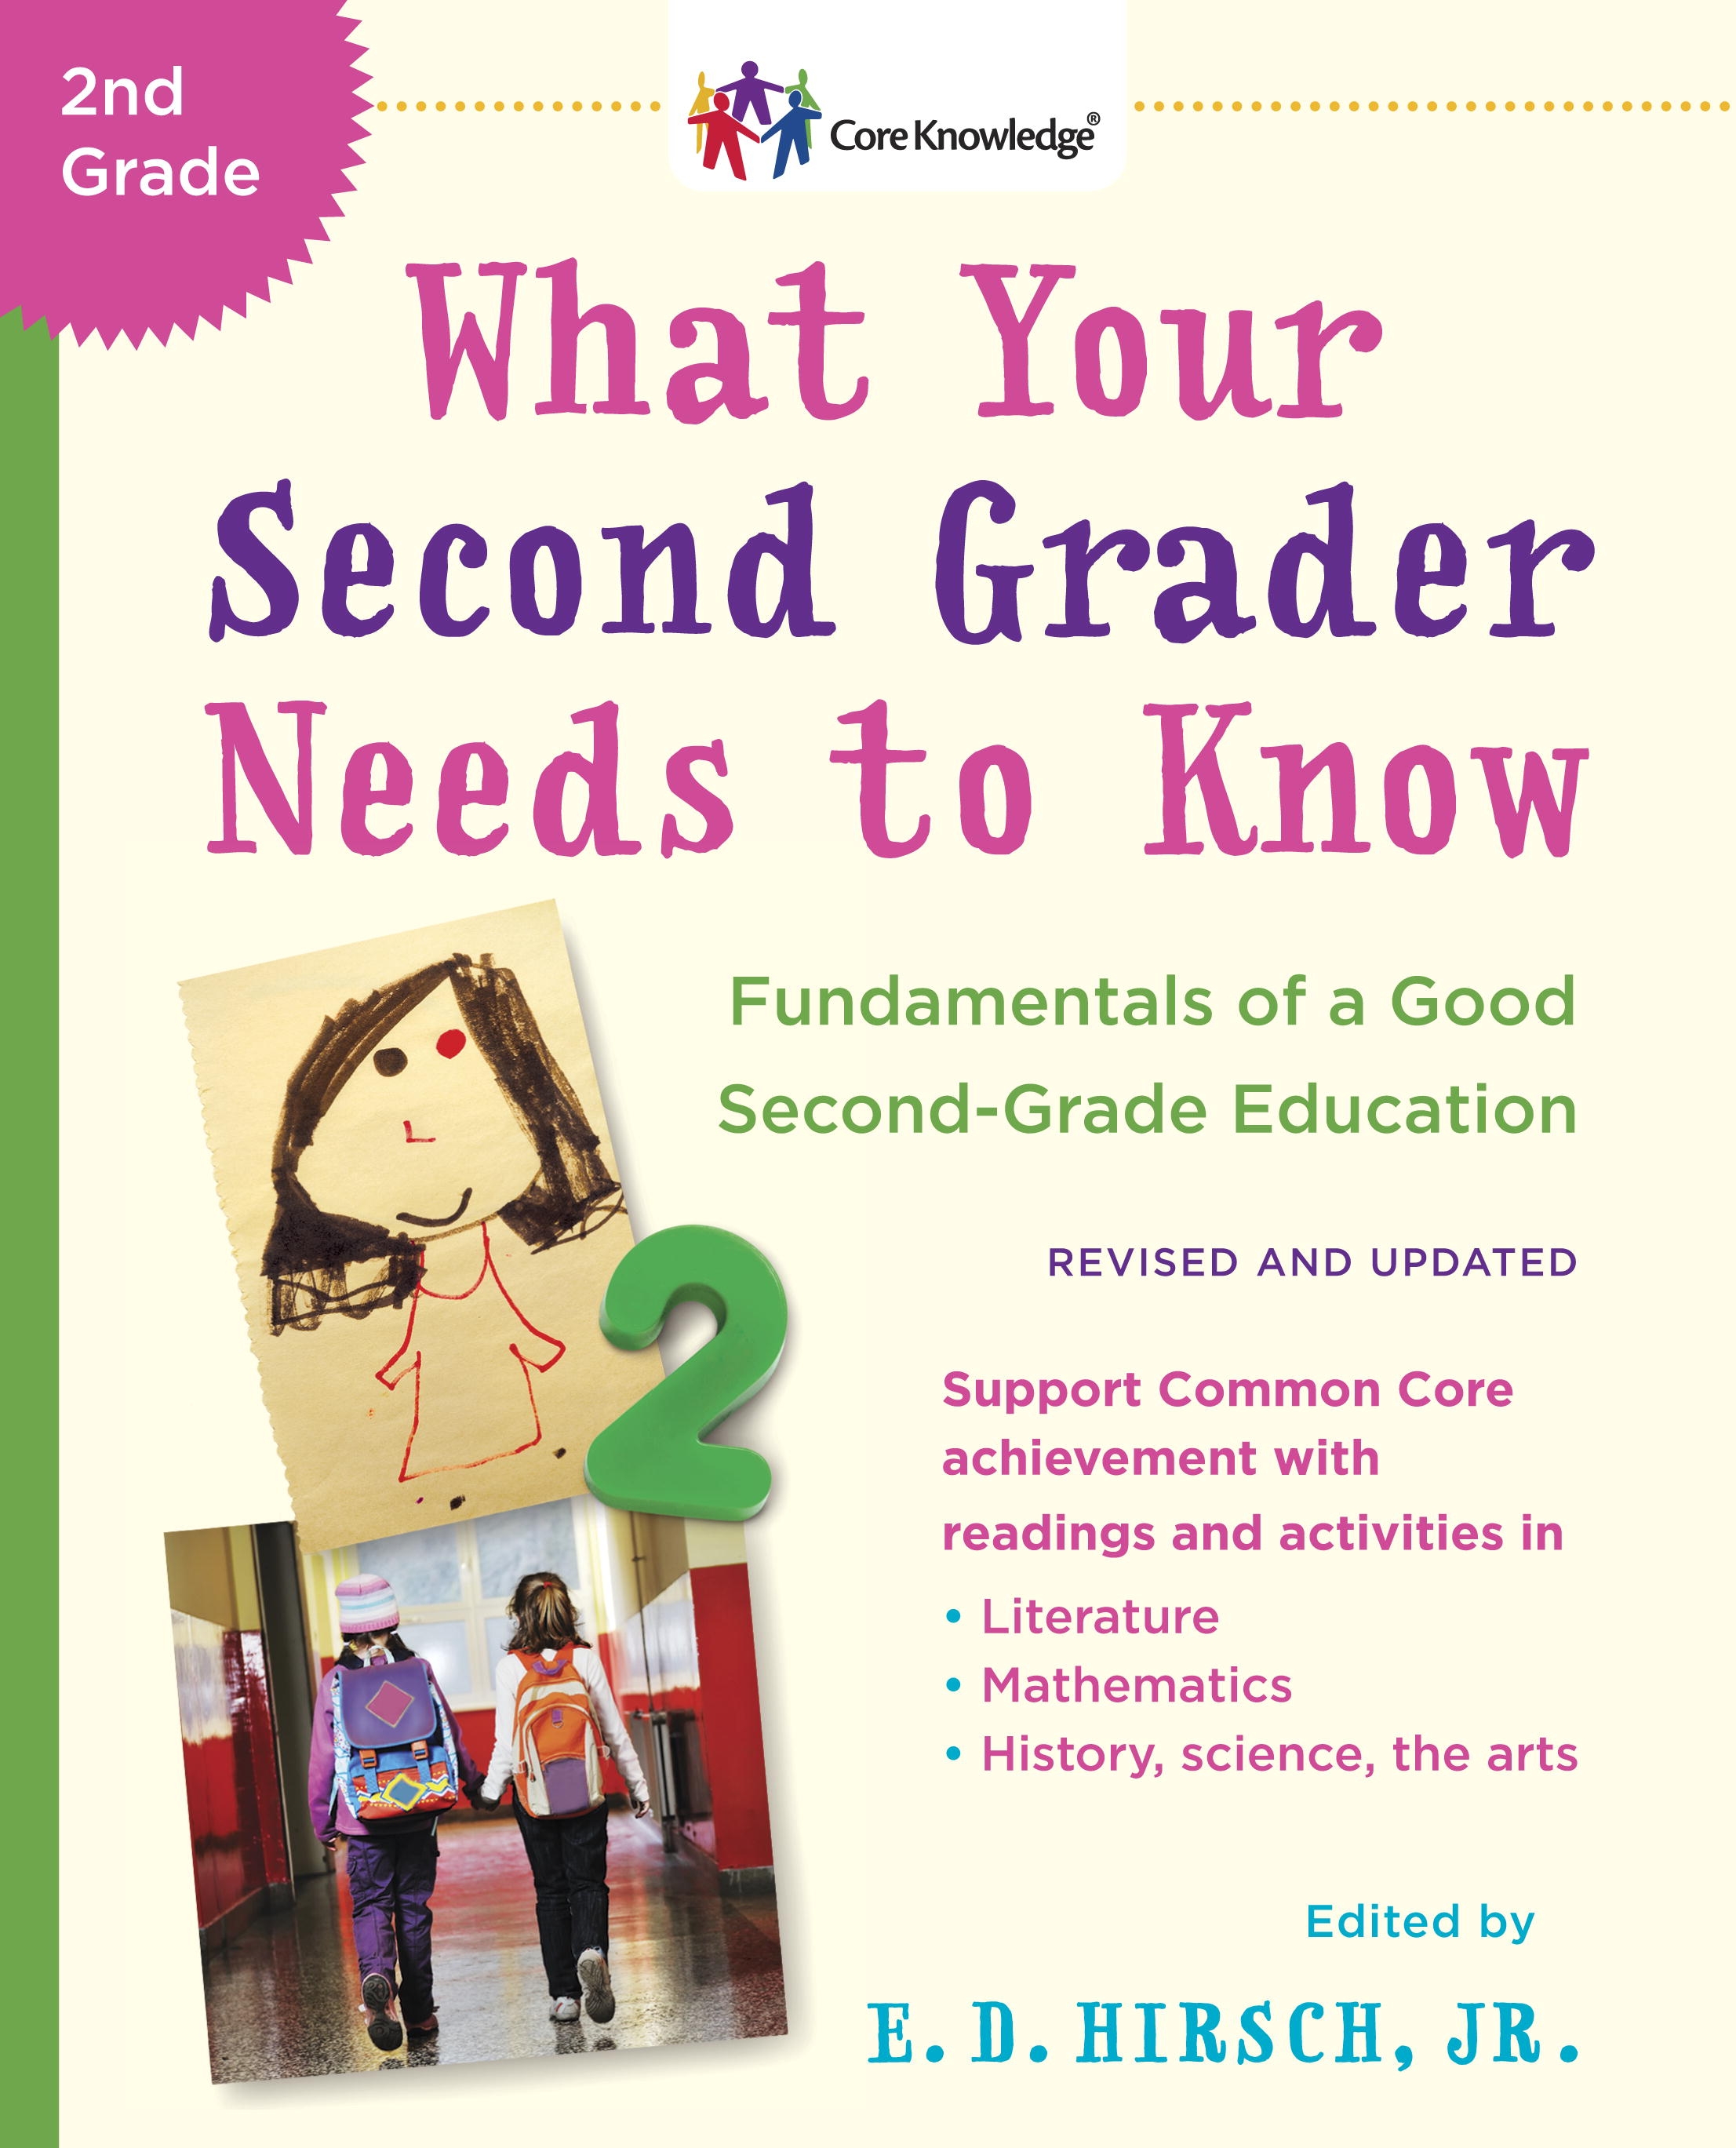 what-your-second-grader-needs-to-know-revised-and-updated-by-e-d